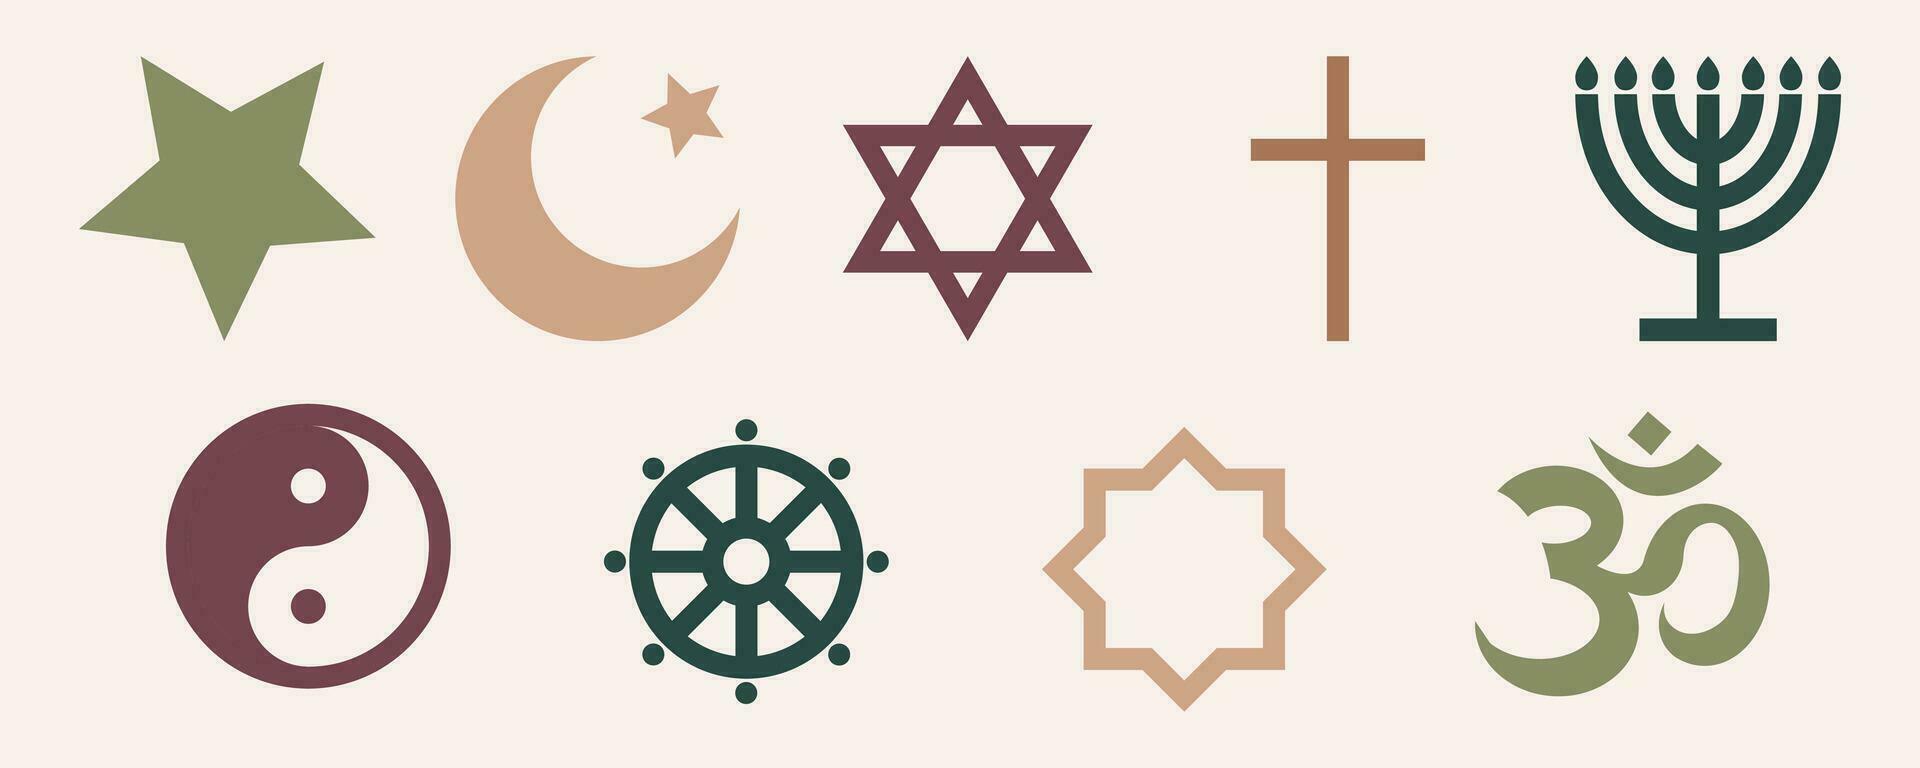 World religious symbol set elements. Collection of shape silhouette - islam, judaism, buddhism, christian, taoism, menorah. Vector flat illustration isolated on white background.